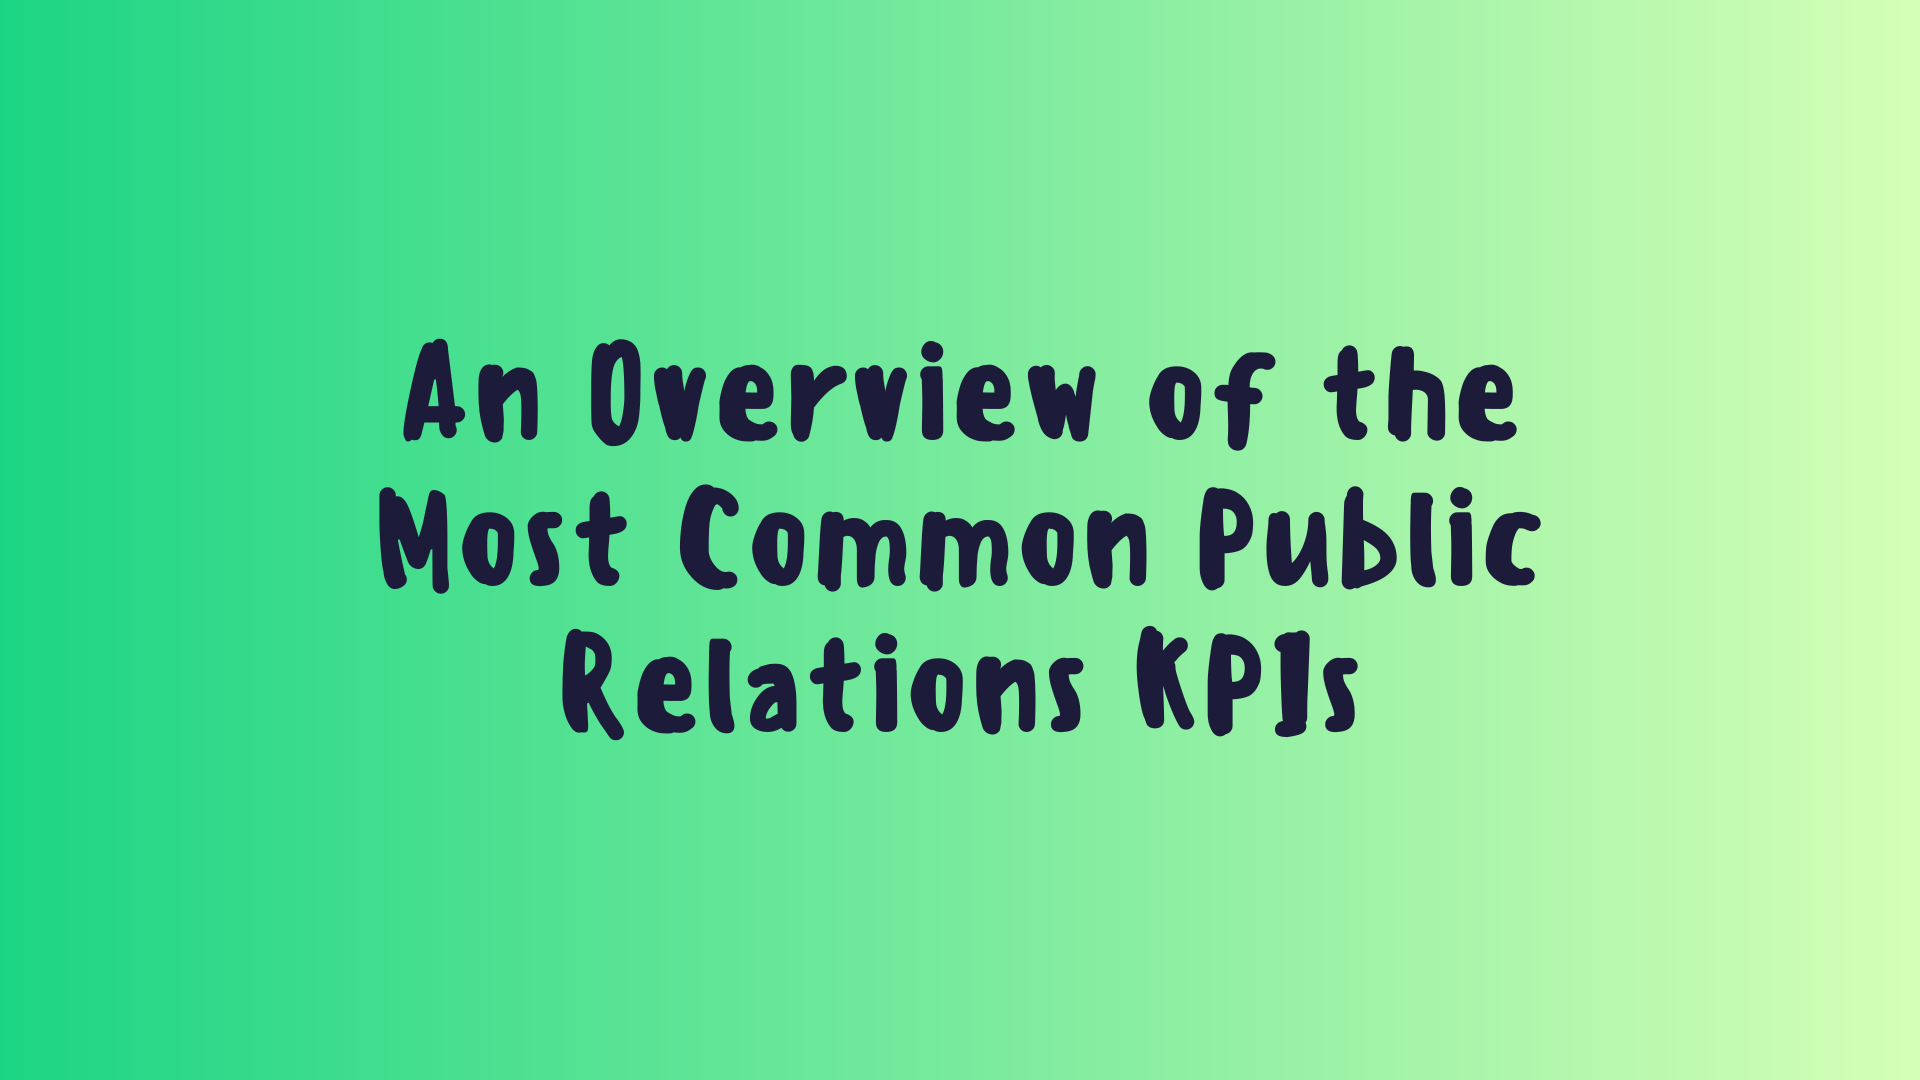 An Overview of the Most Common Public Relations KPIs